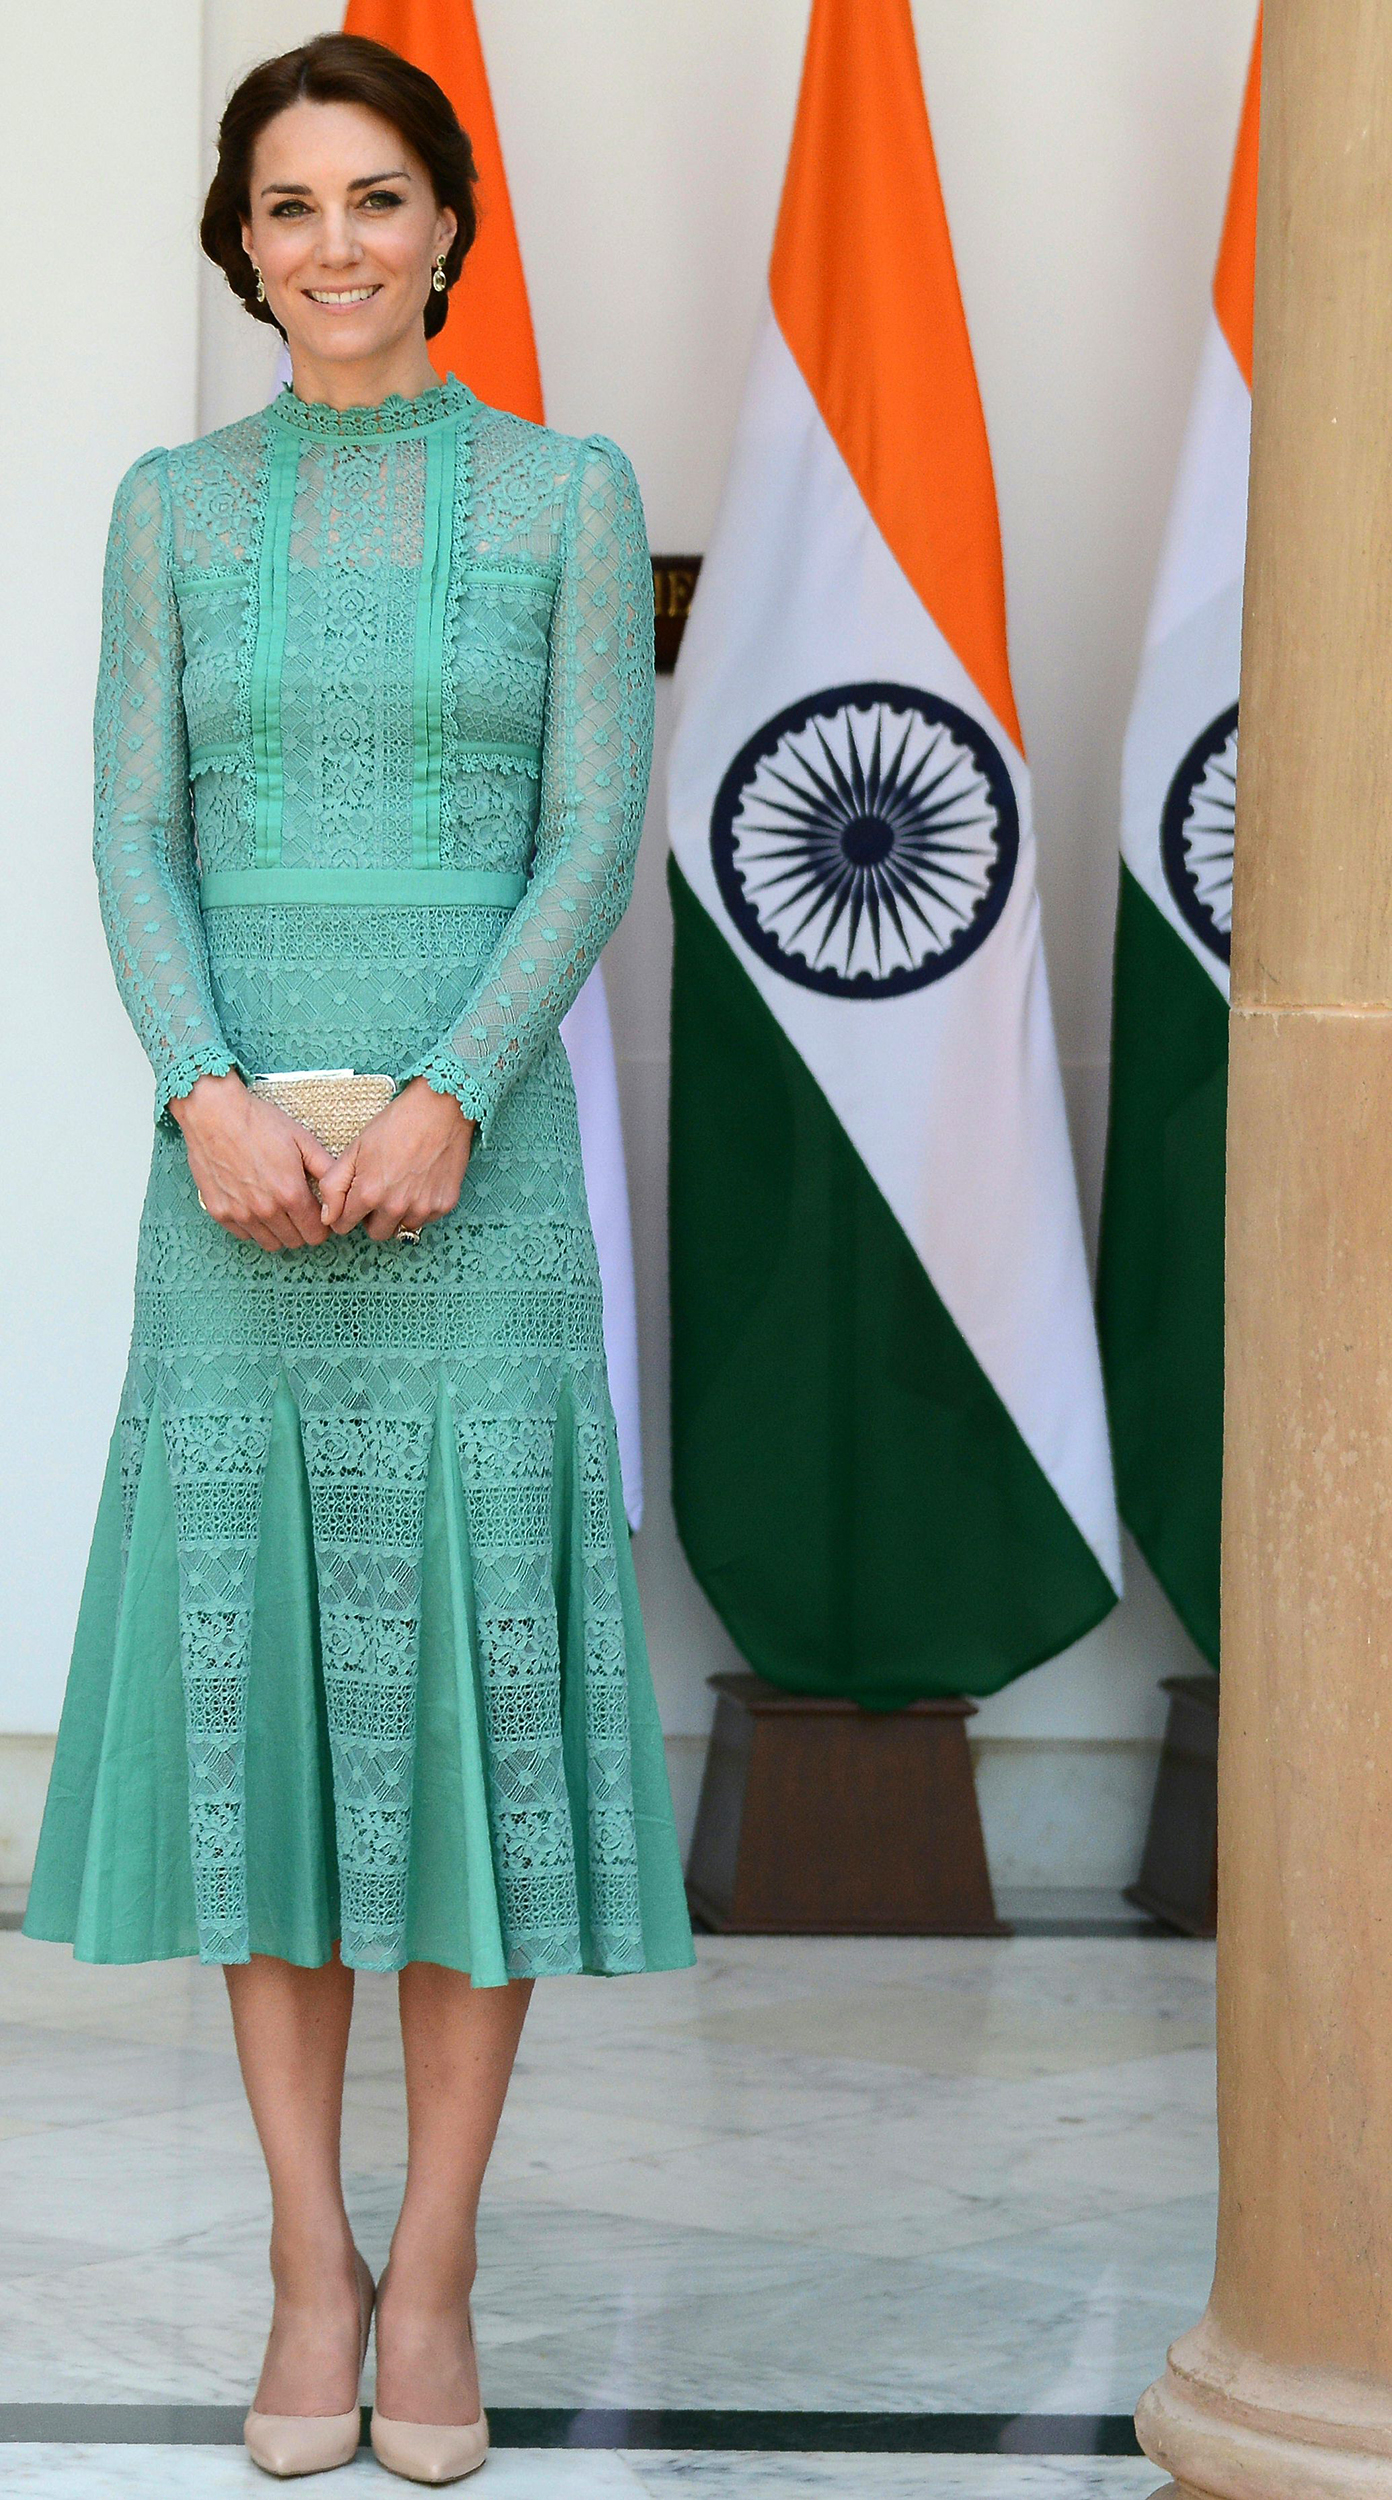 Catherine, Duchess of Cambridge looks on ahead of a lunch event with India's Prime Minister Narendra Modi at Hyderabad House in New Delhi on April 12, 2016.